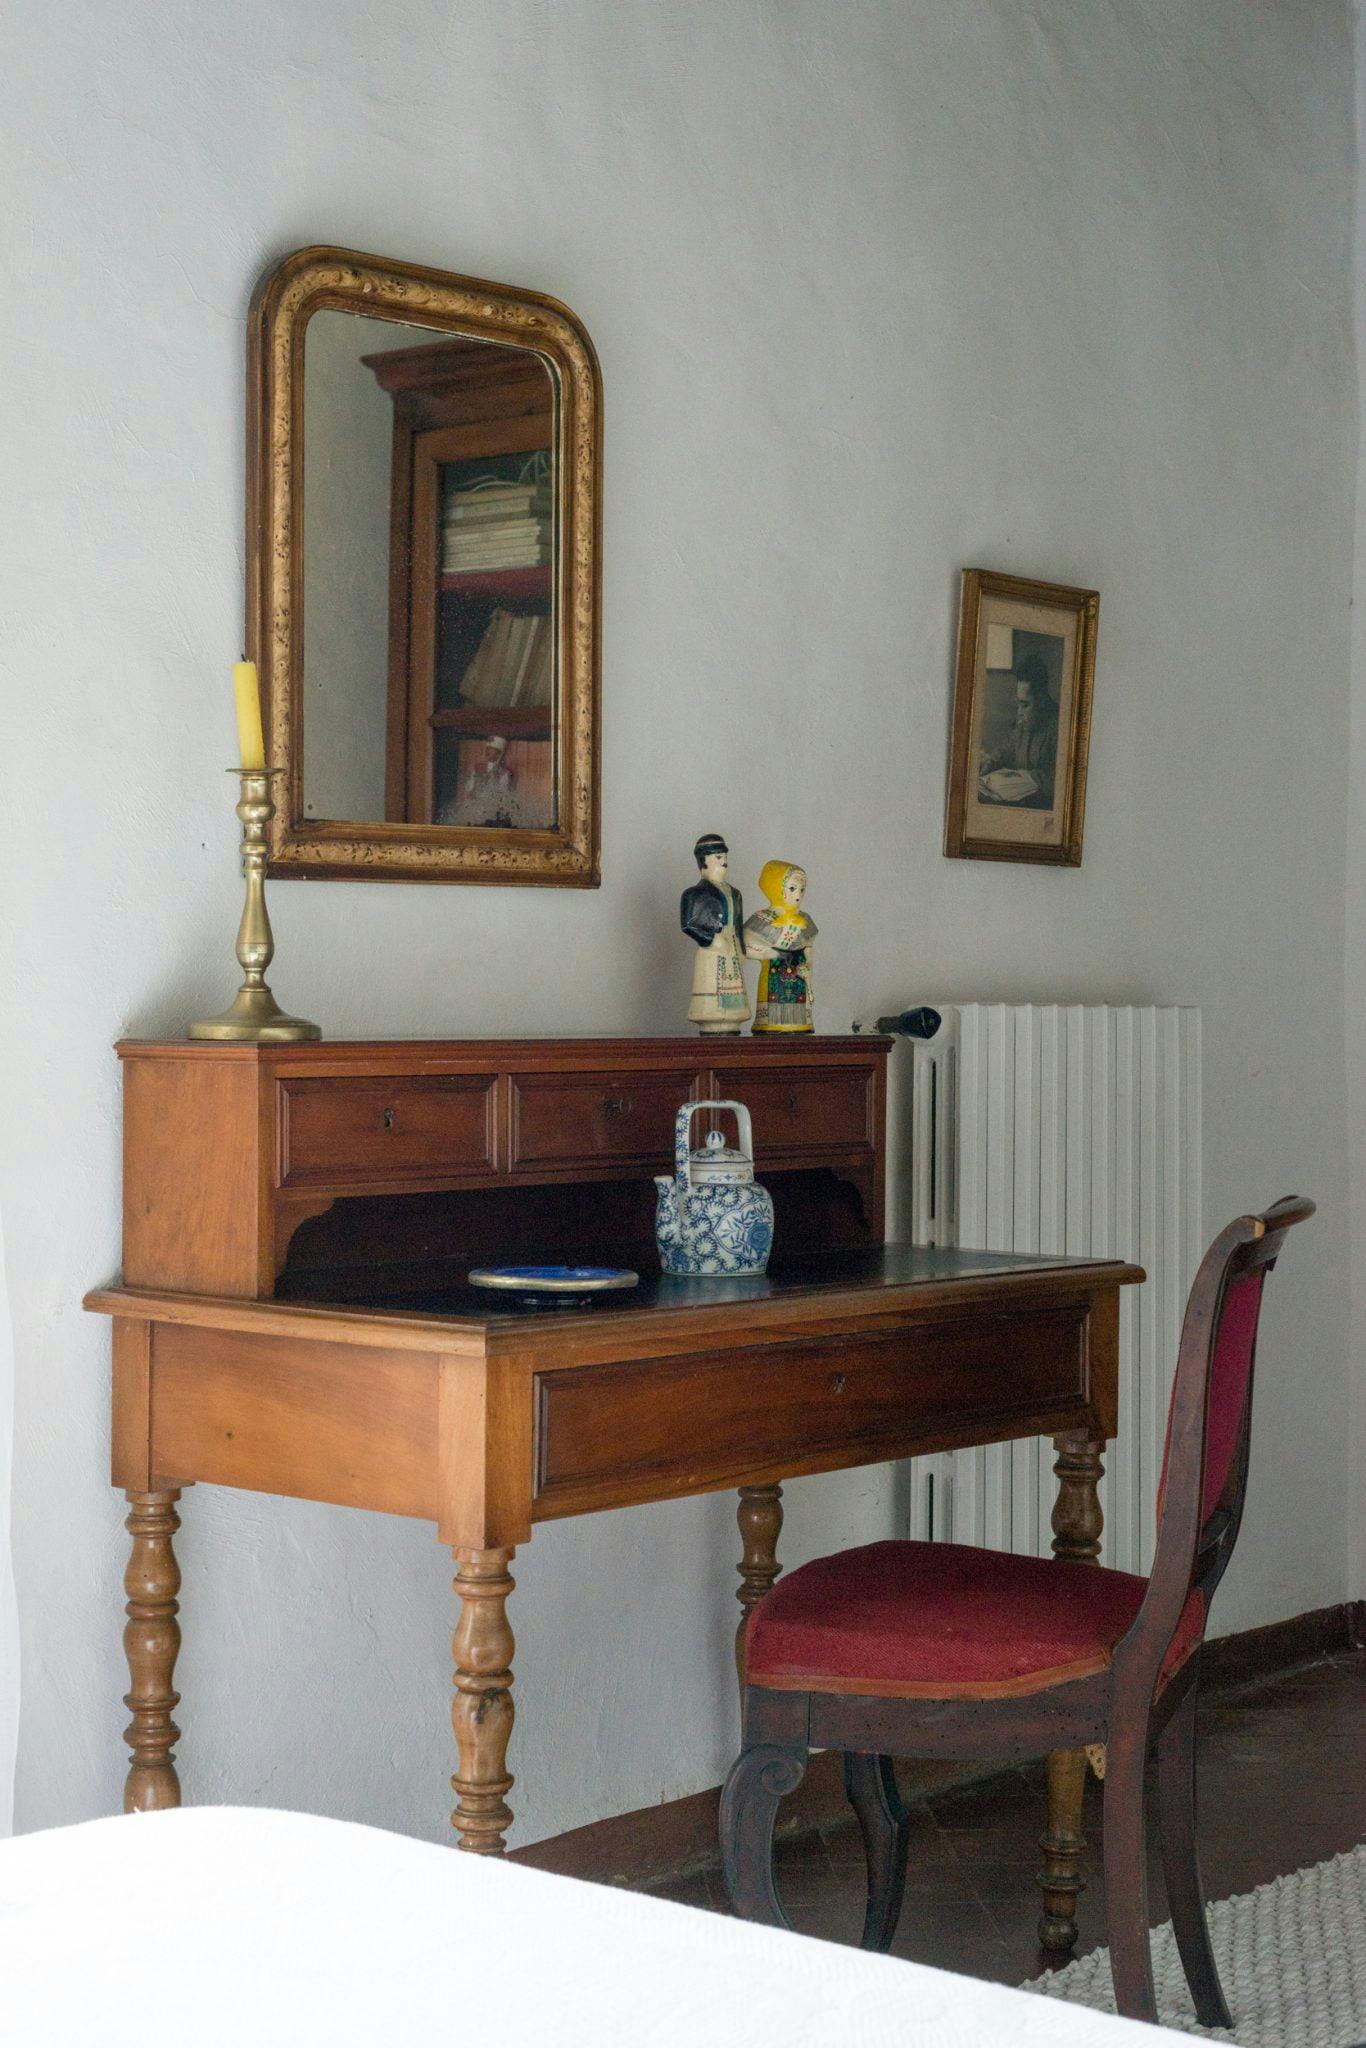 Antique-style desk and chair in one of the bedrooms